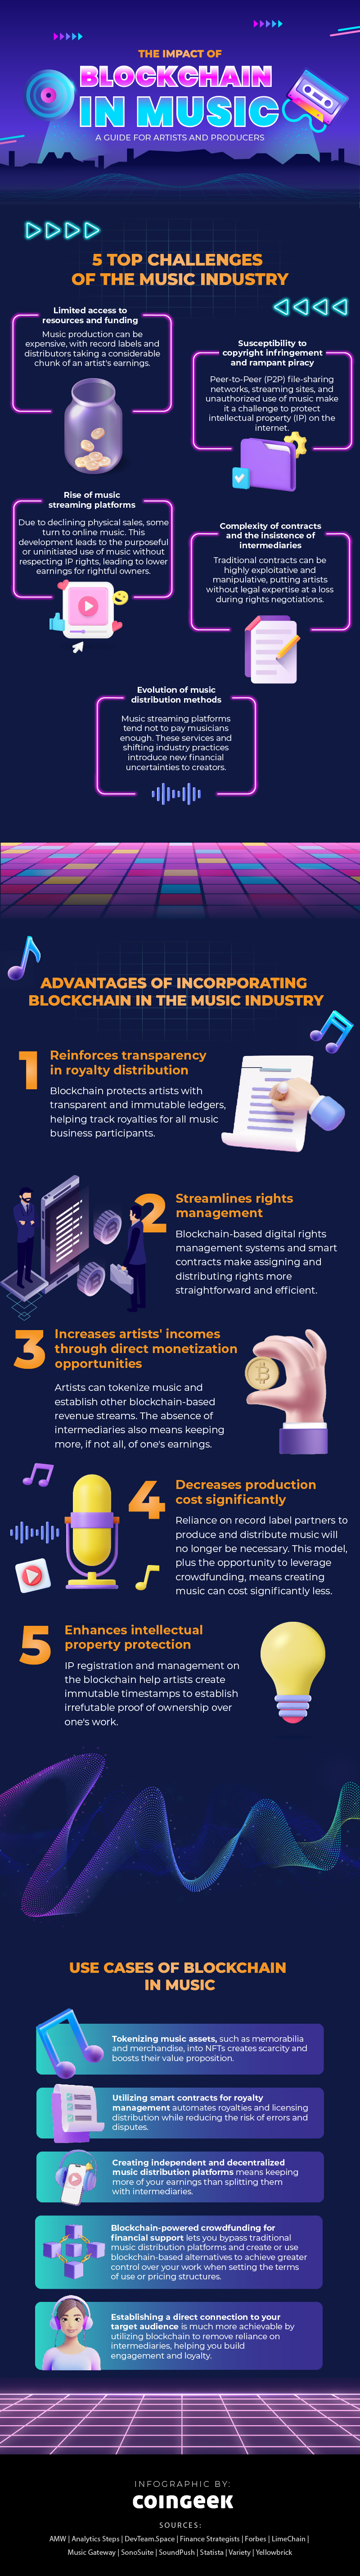 THE IMPACT OF BLOCKCHAIN IN MUSIC: A GUIDE FOR ARTISTS AND PRODUCERS infographic for article